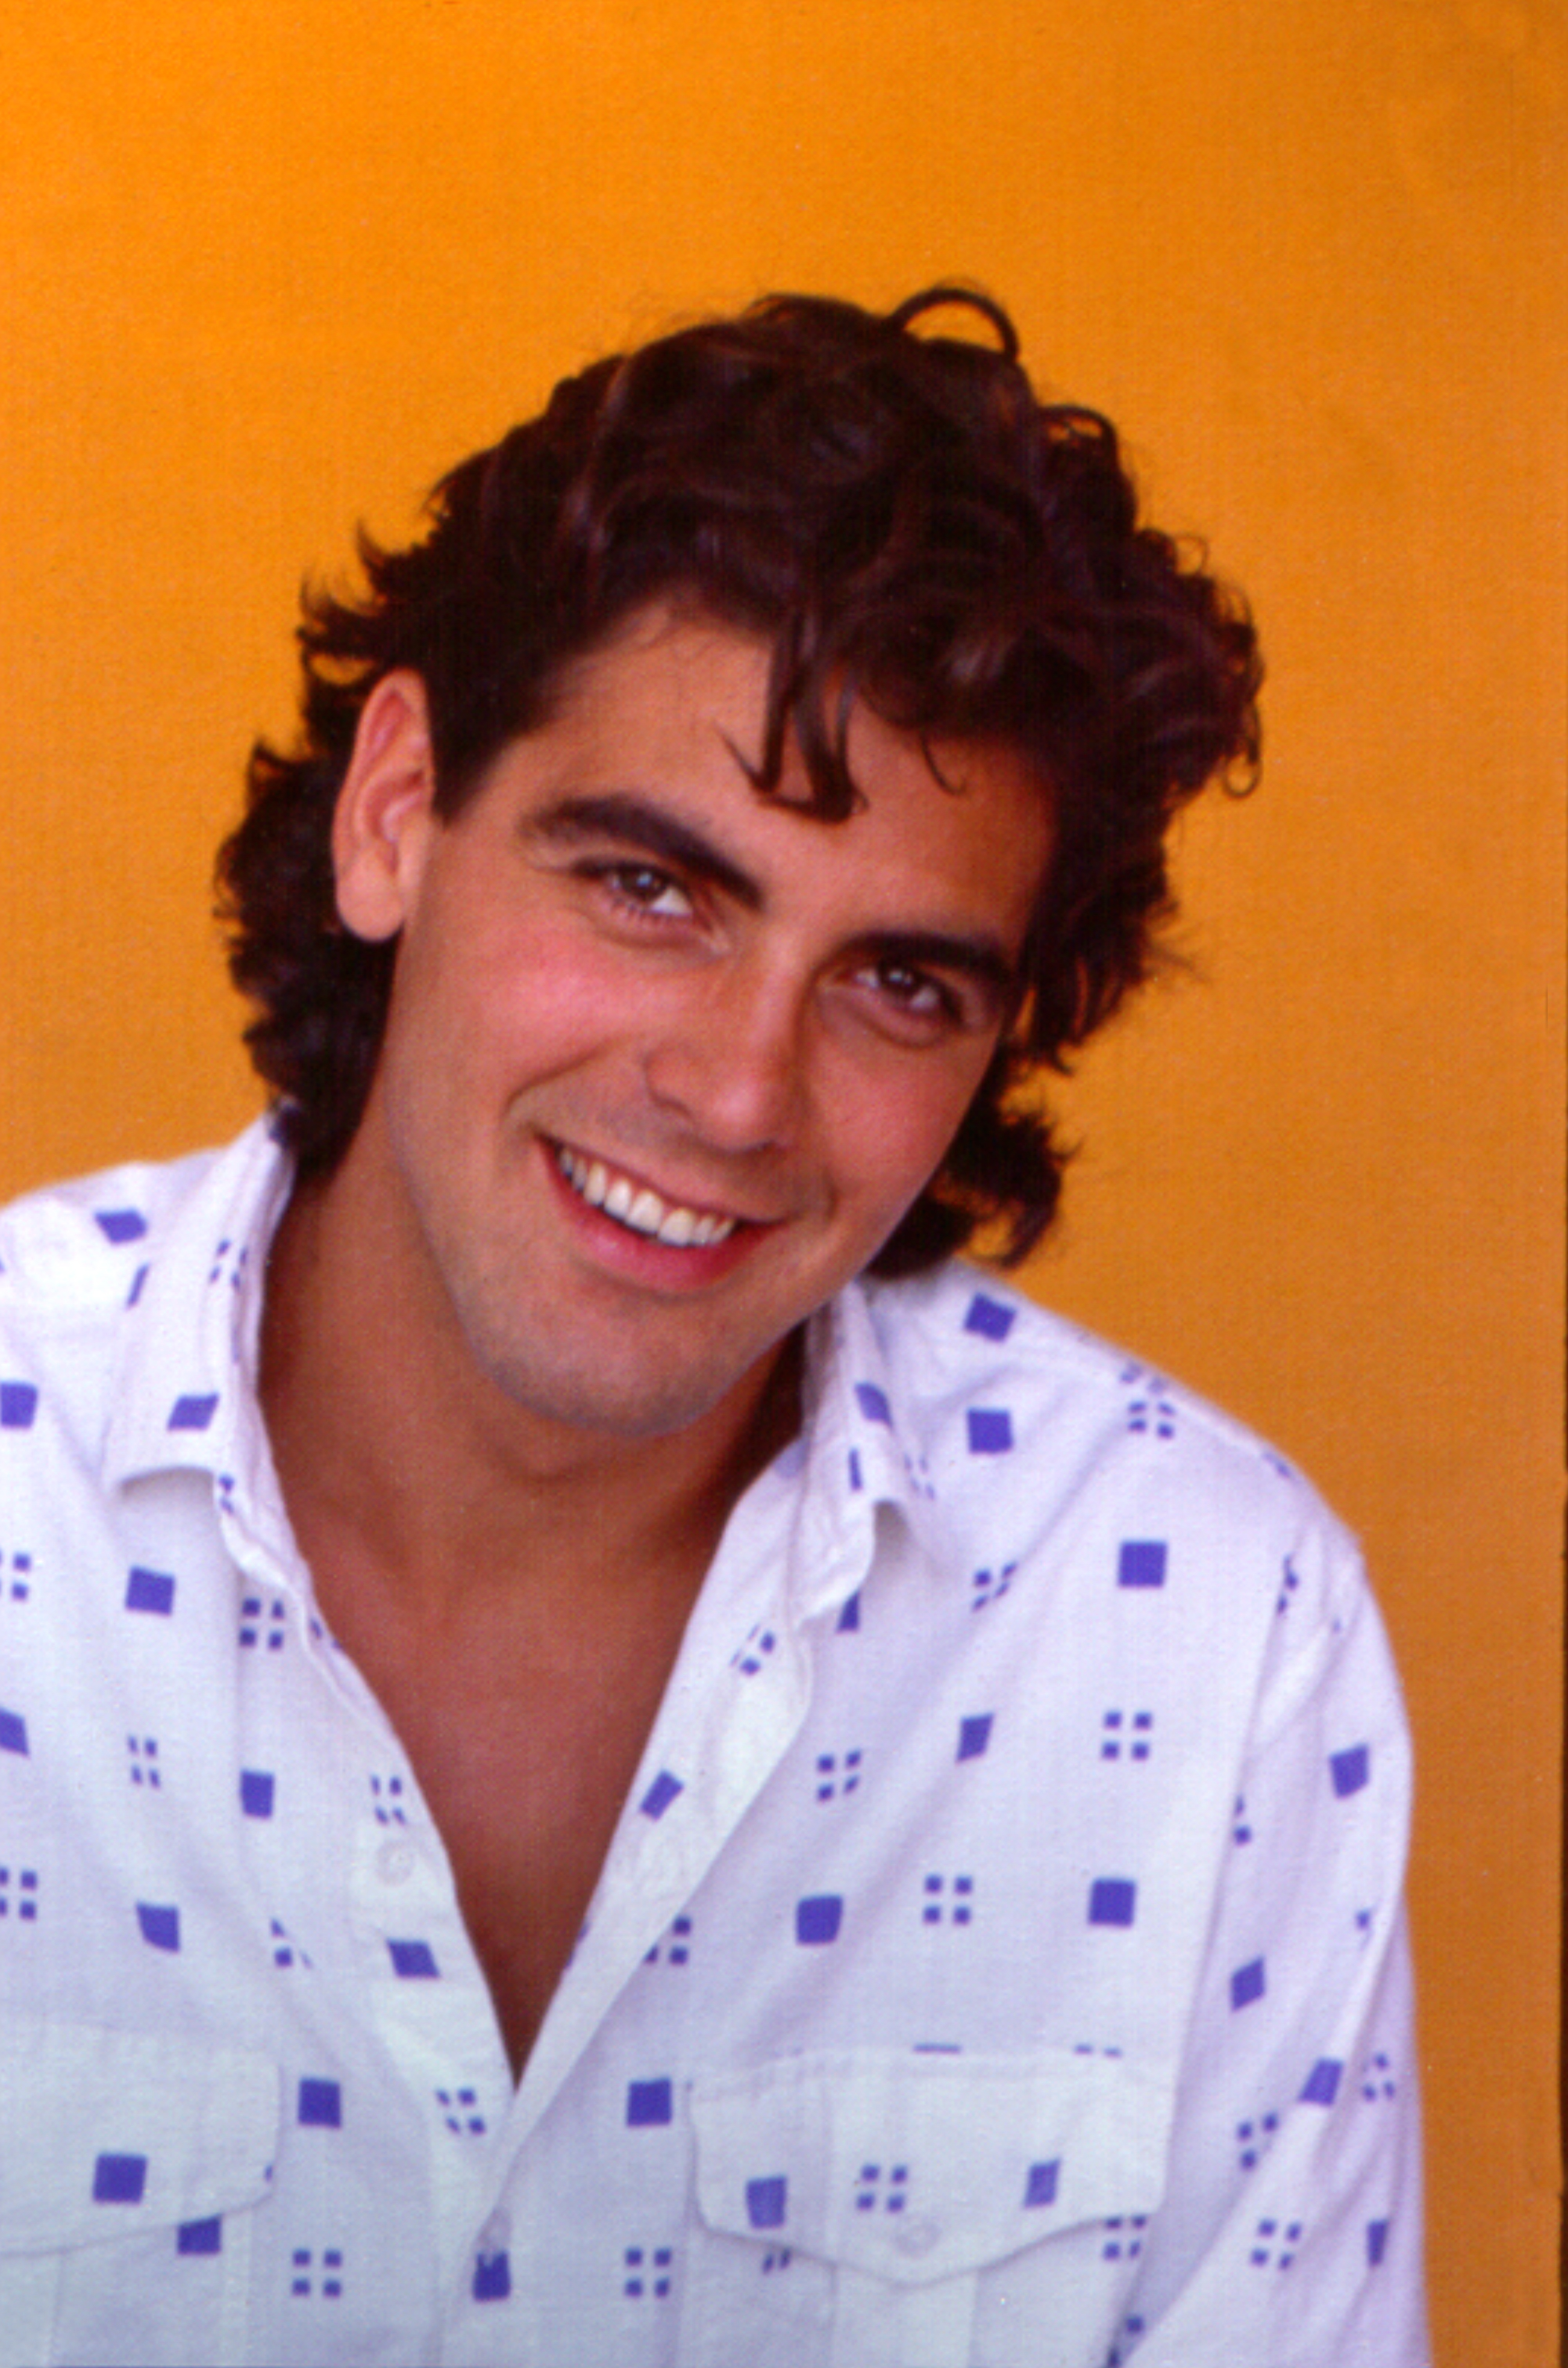 George Clooney during a portrait session in May 1985 in Los Angeles, California | Source: Getty Images